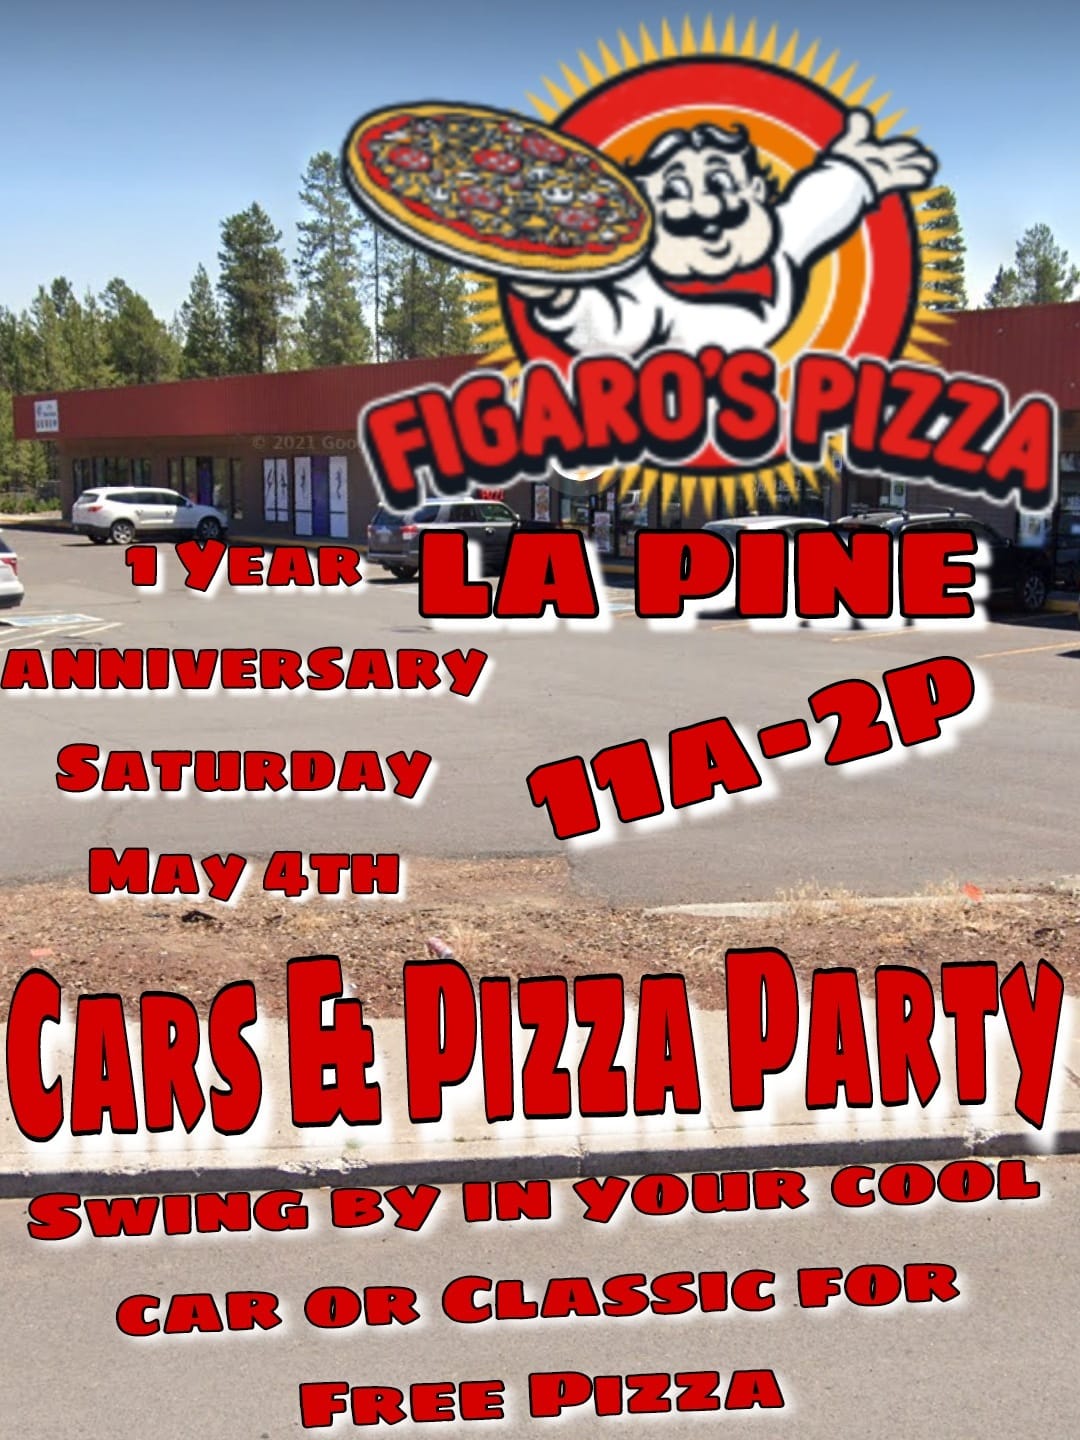 Figaro’s Cars & Pizza